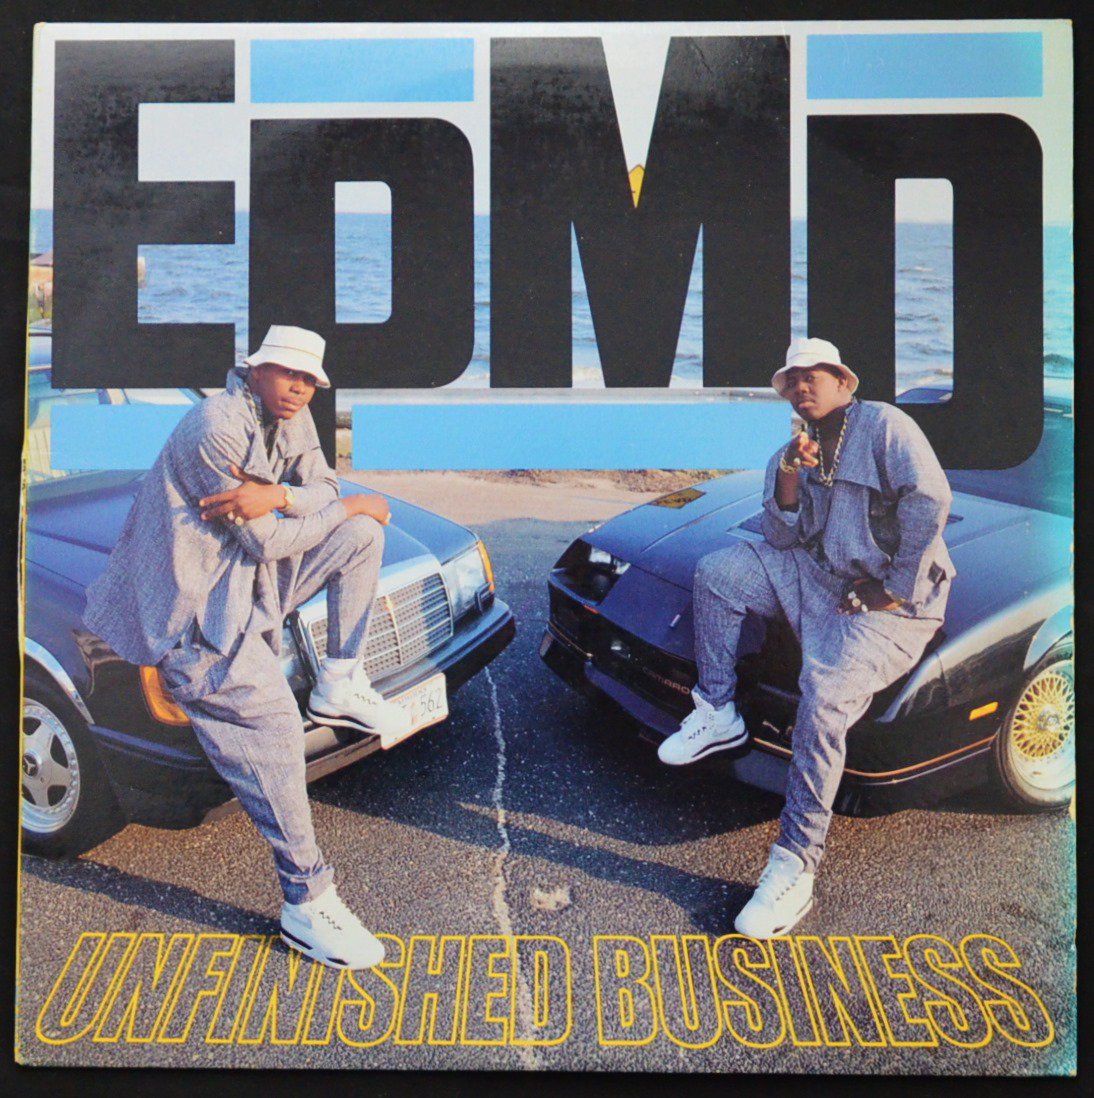 EPMD / UNFINISHED BUSINESS (1LP) - HIP TANK RECORDS